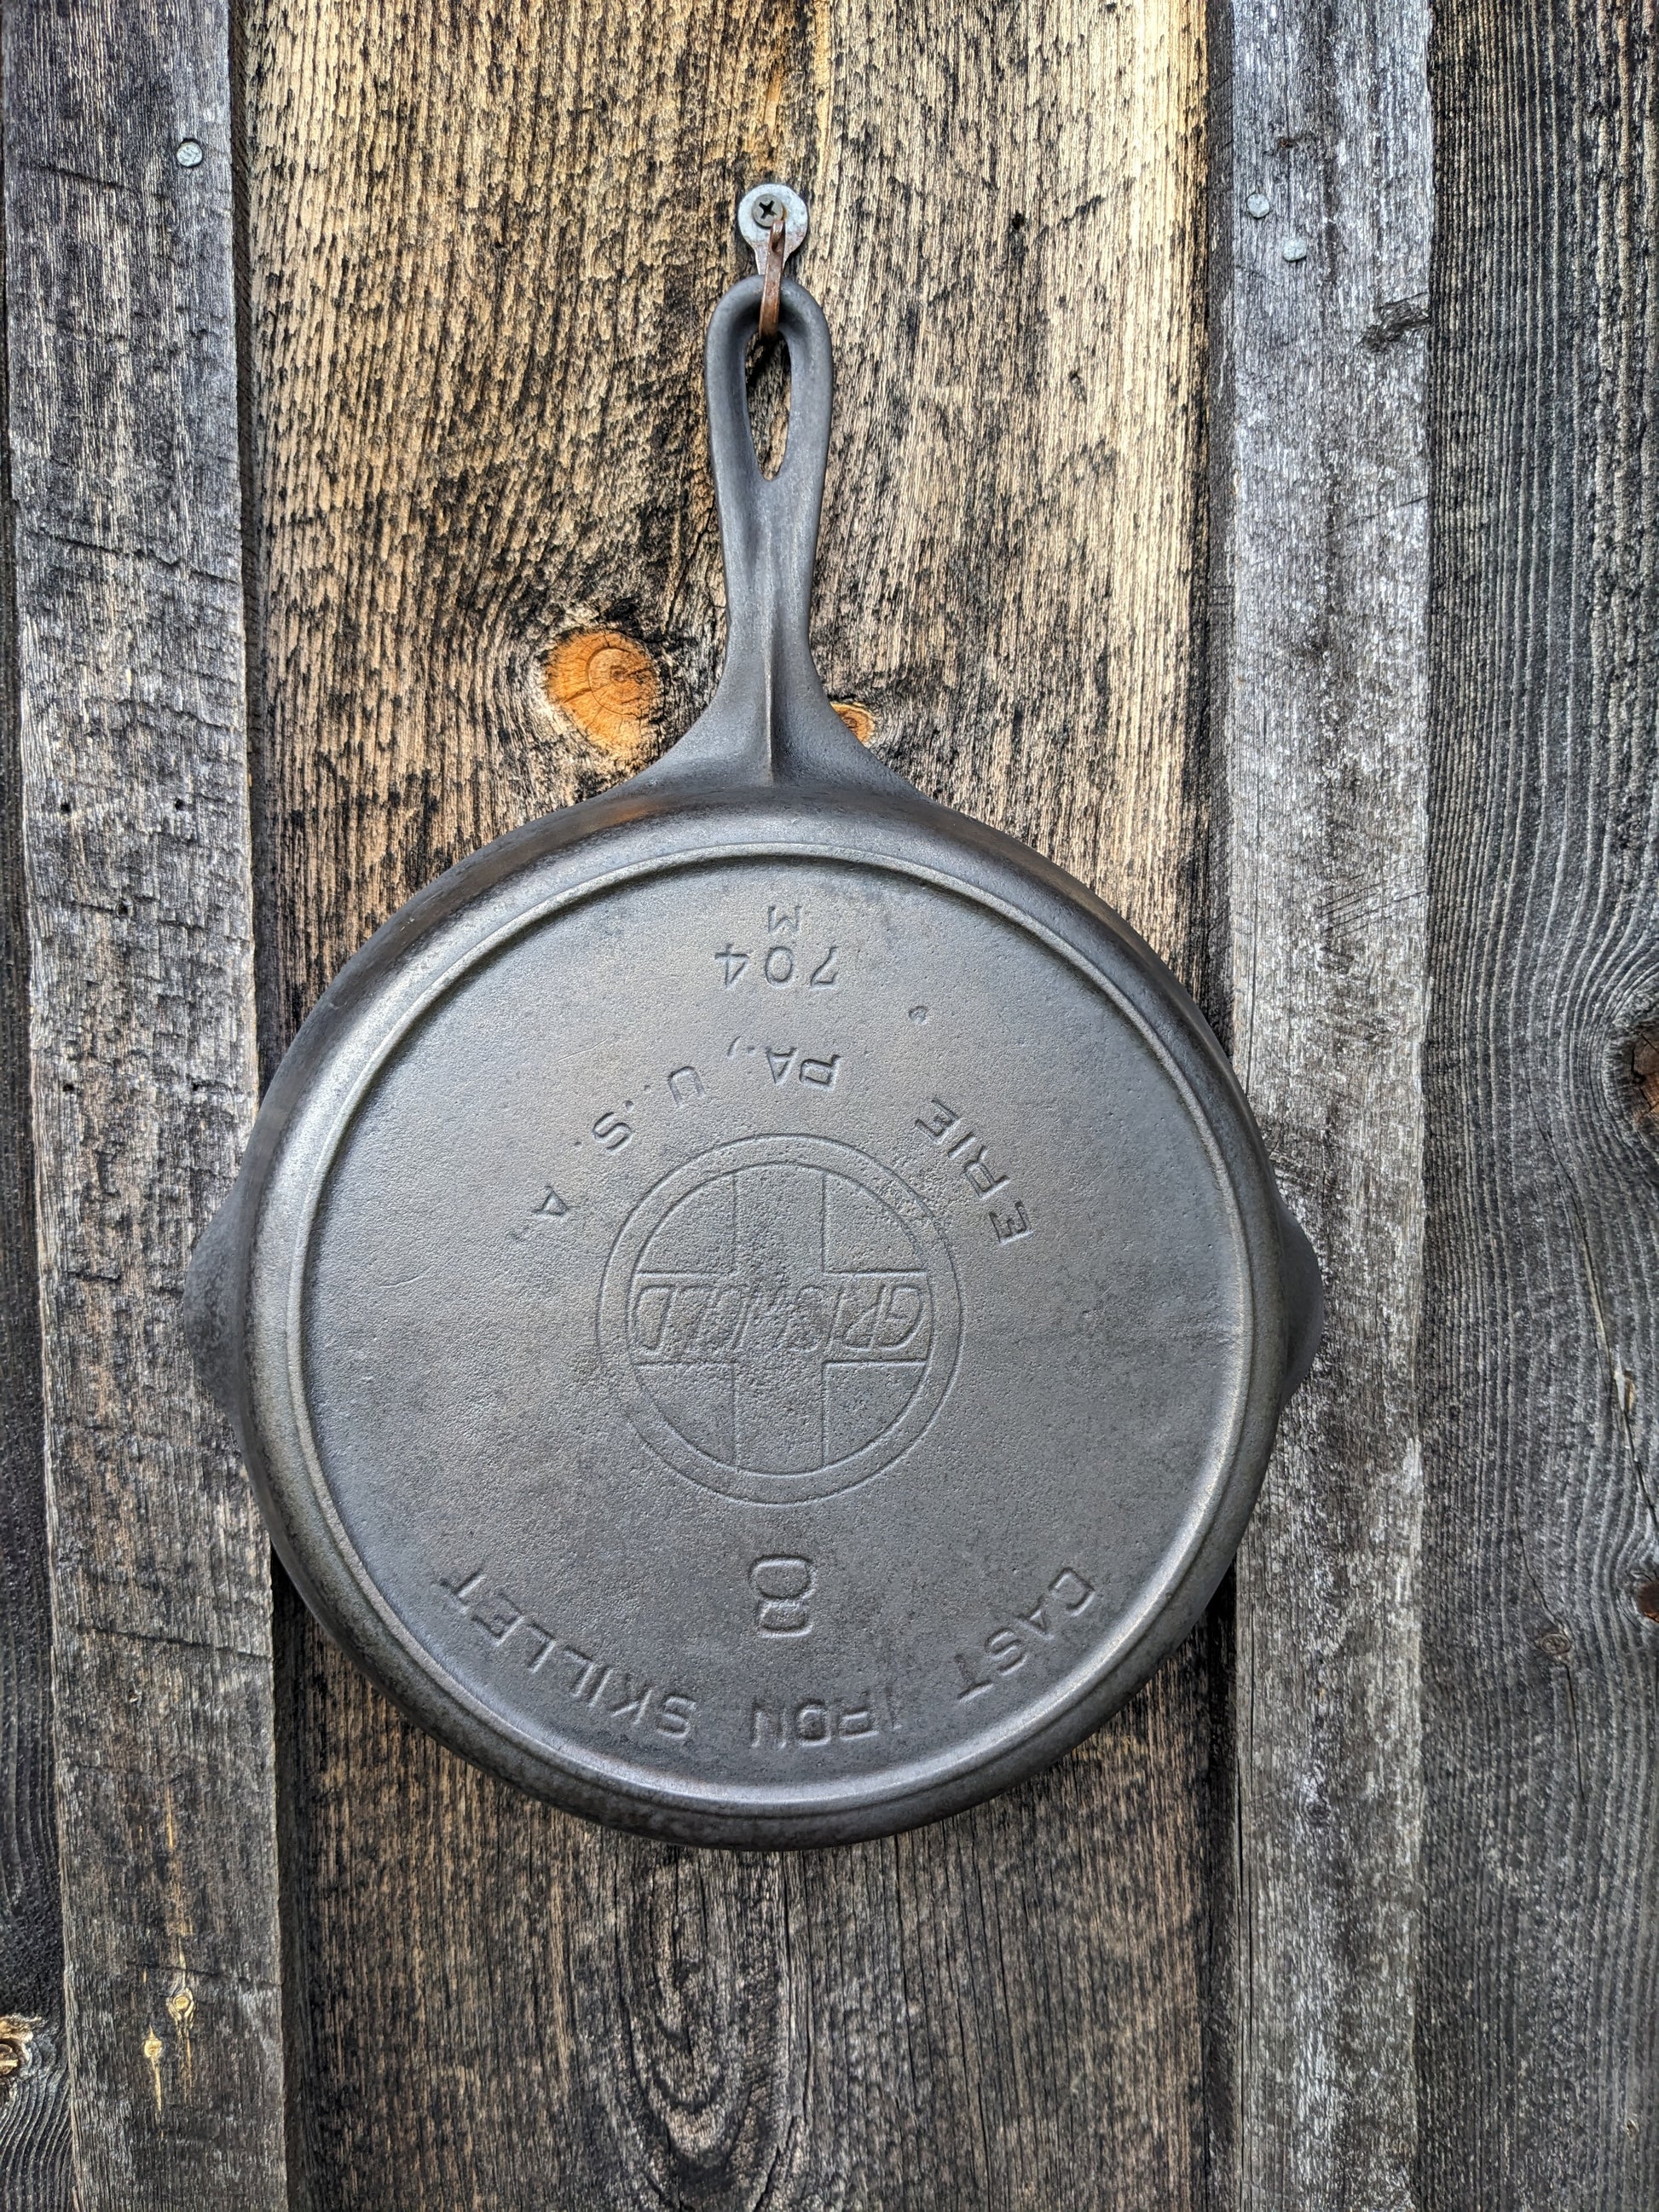 A History of Griswold Cast Iron 